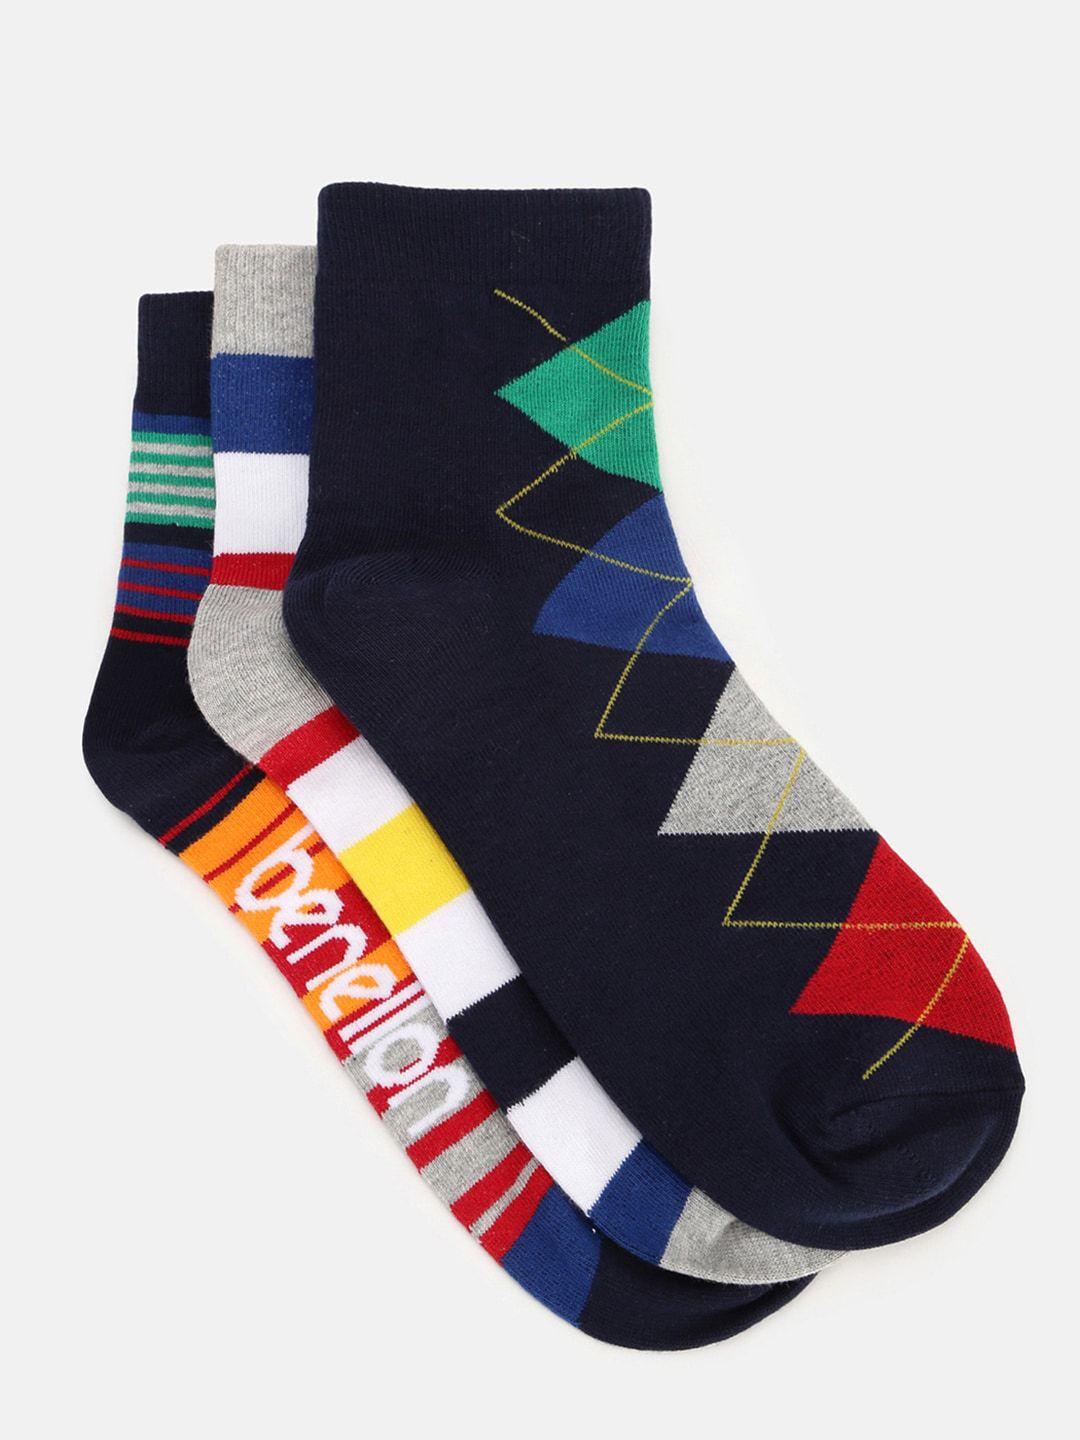 united-colors-of-benetton-men-pack-of-3-striped-patterned-above-ankle-length-socks